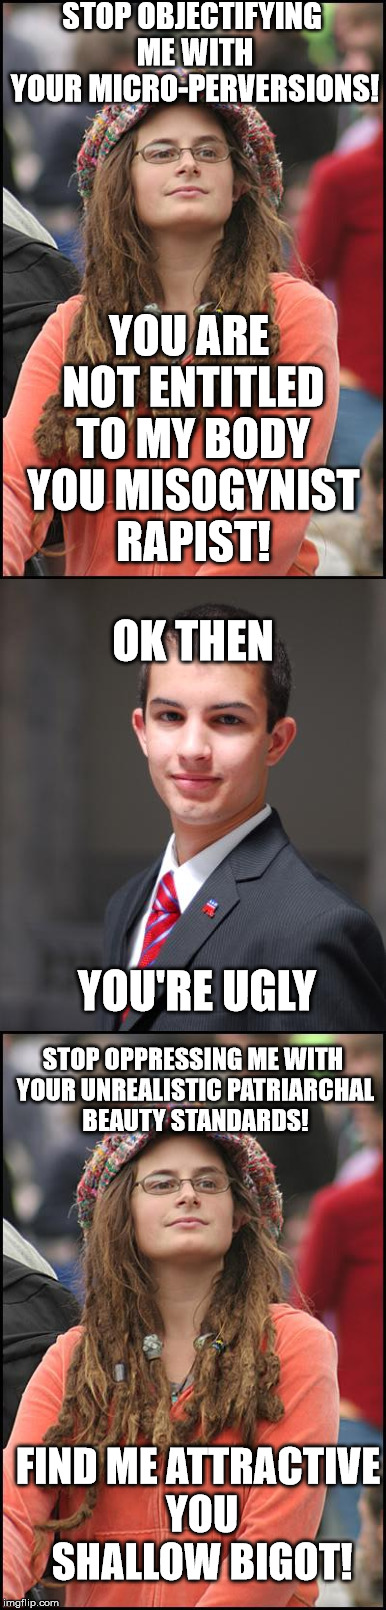 STOP OBJECTIFYING ME WITH YOUR MICRO-PERVERSIONS! YOU ARE NOT ENTITLED TO MY BODY YOU MISOGYNIST RAPIST! OK THEN; YOU'RE UGLY; STOP OPPRESSING ME WITH YOUR UNREALISTIC PATRIARCHAL BEAUTY STANDARDS! FIND ME ATTRACTIVE YOU SHALLOW BIGOT! | image tagged in college liberal,college conservative | made w/ Imgflip meme maker